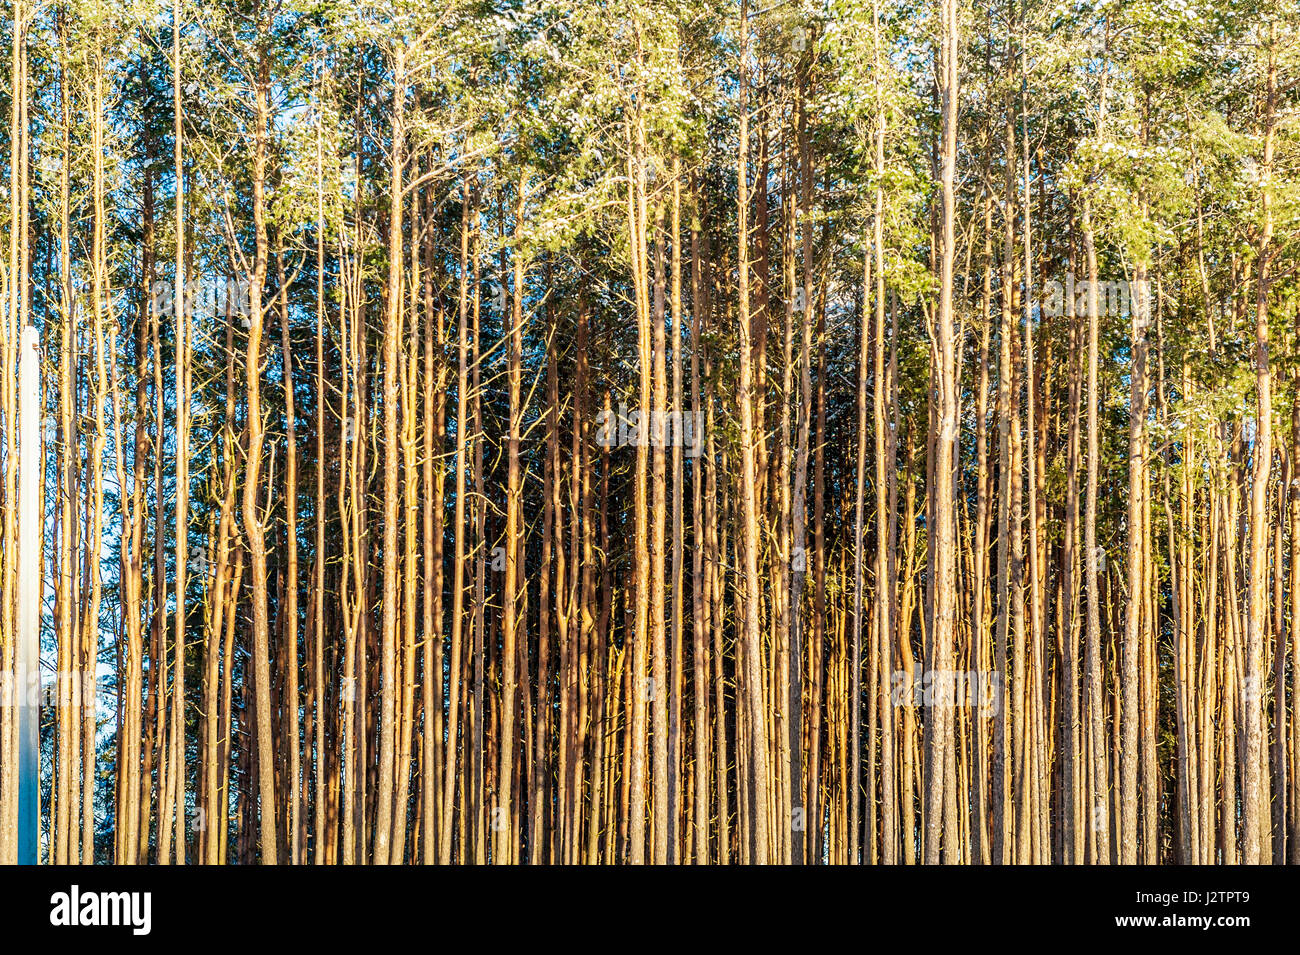 Coniferous forest background of trunks of long smooth trees Stock Photo